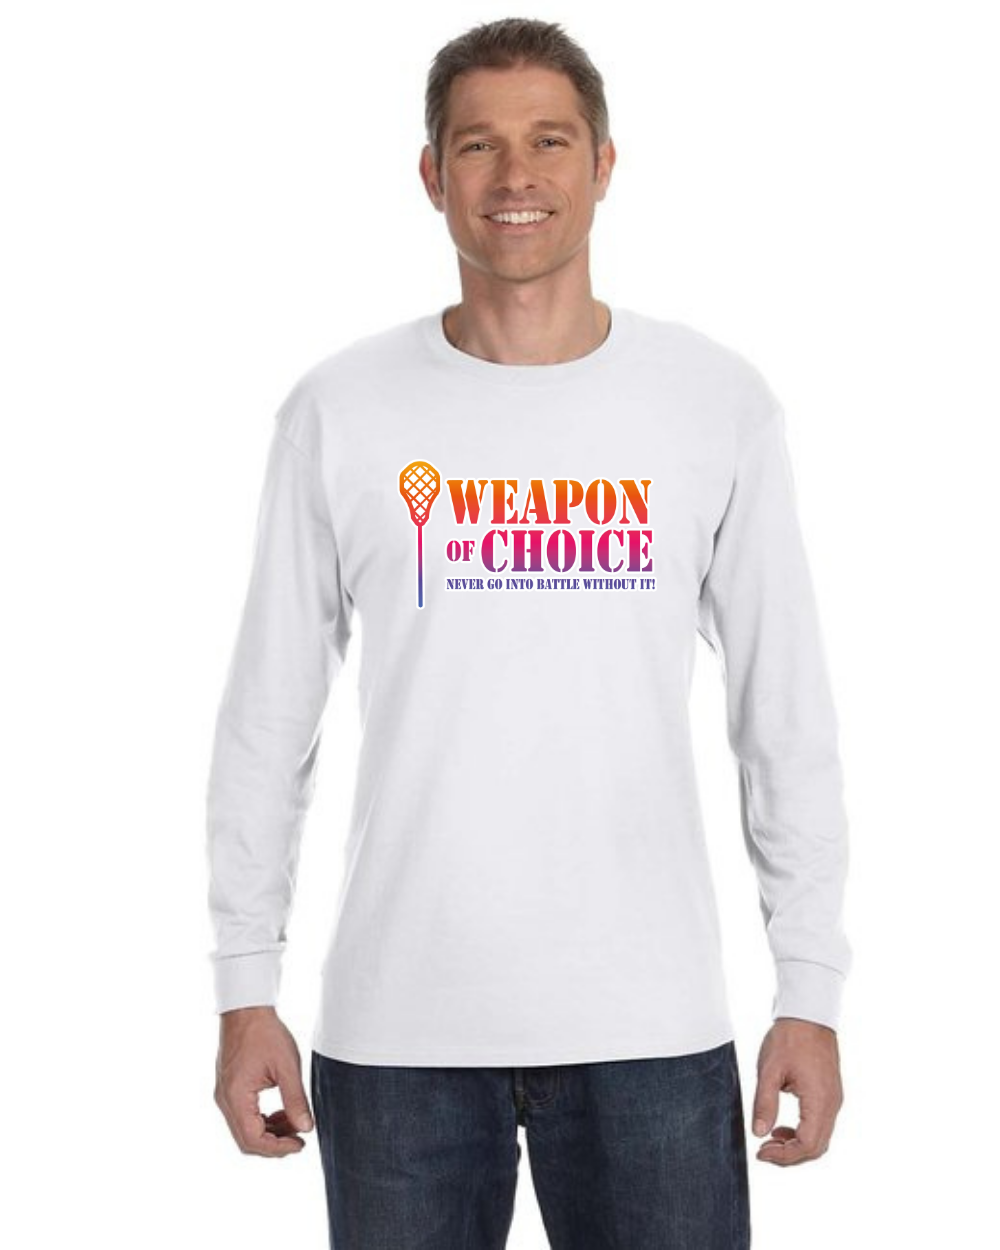 Weapon Of Choice Never Go Into Battle Without It! - Long Sleeve